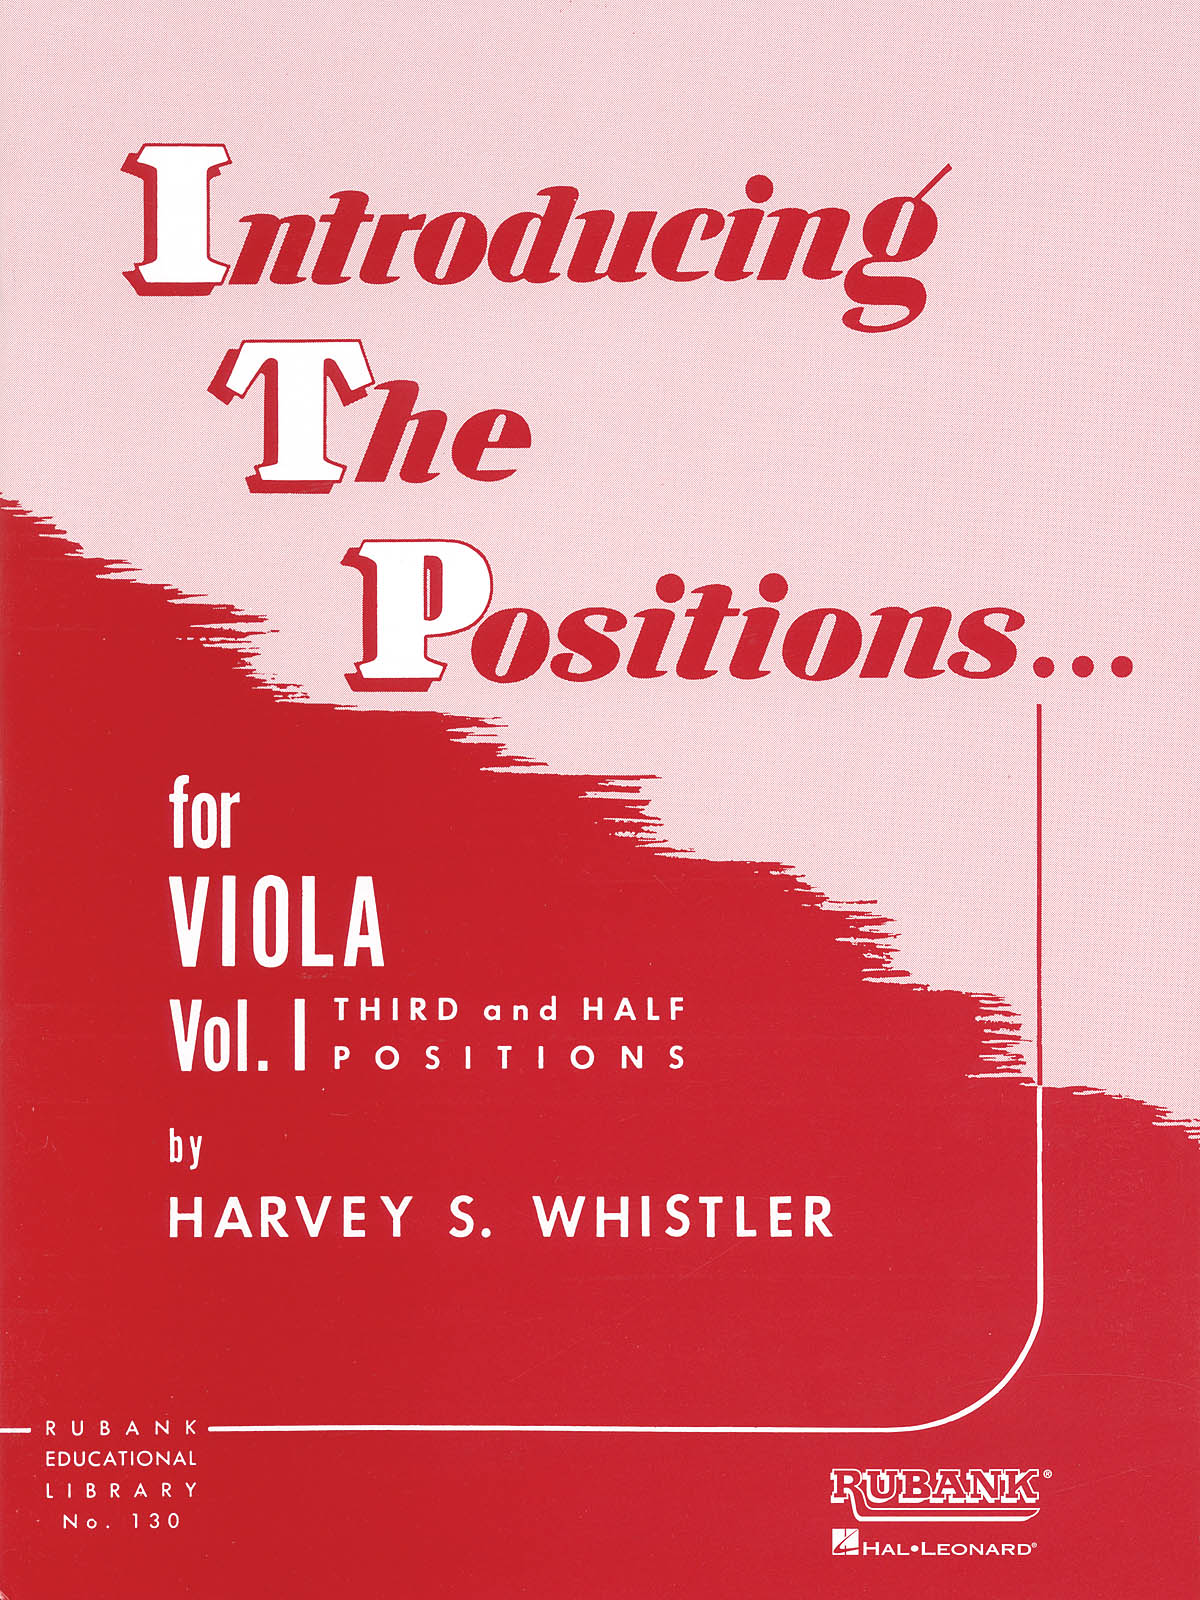 Introducing the Positions for Viola Vol. 1 - noty na violu